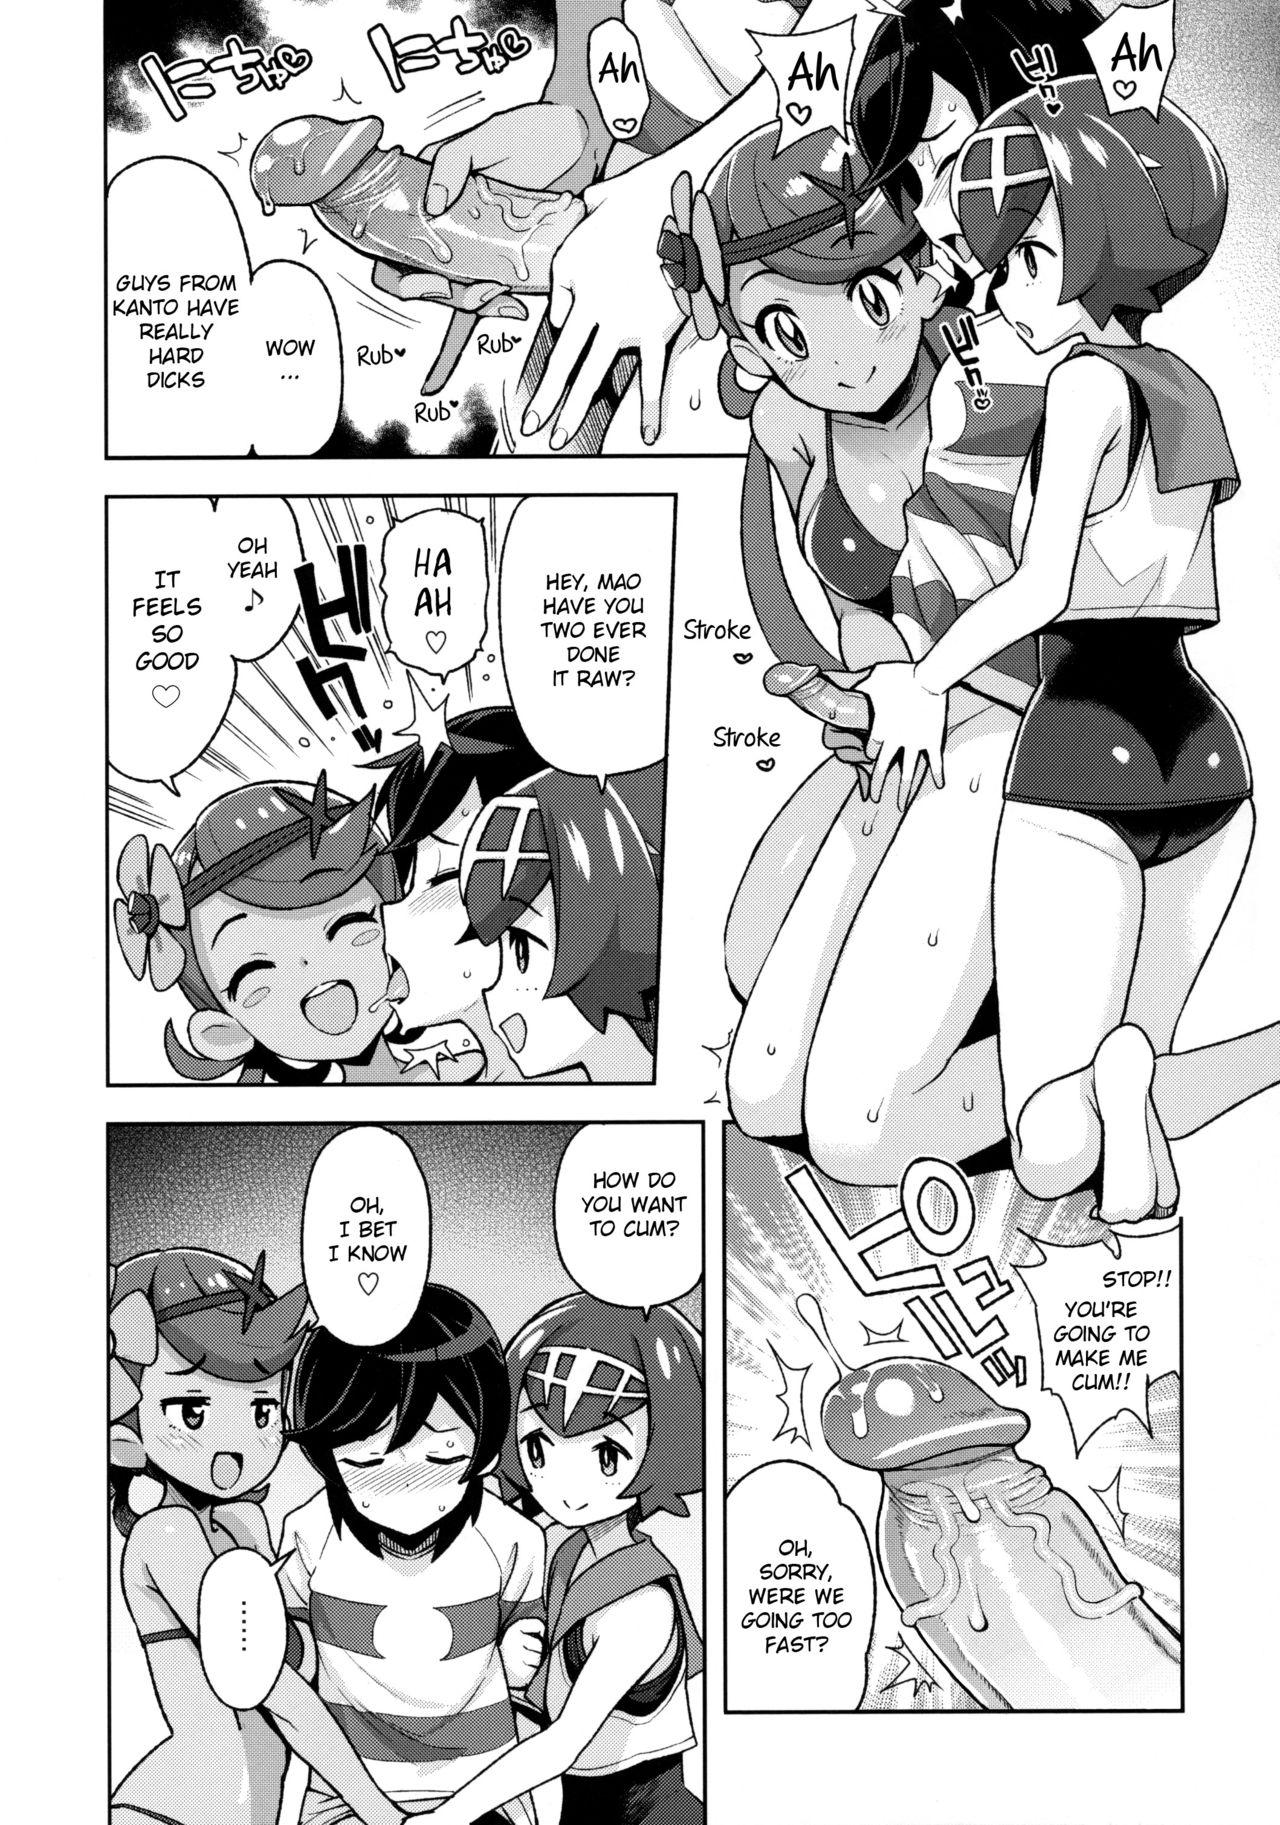 Group MAO FRIENDS2 - Pokemon | pocket monsters Fodendo - Page 6